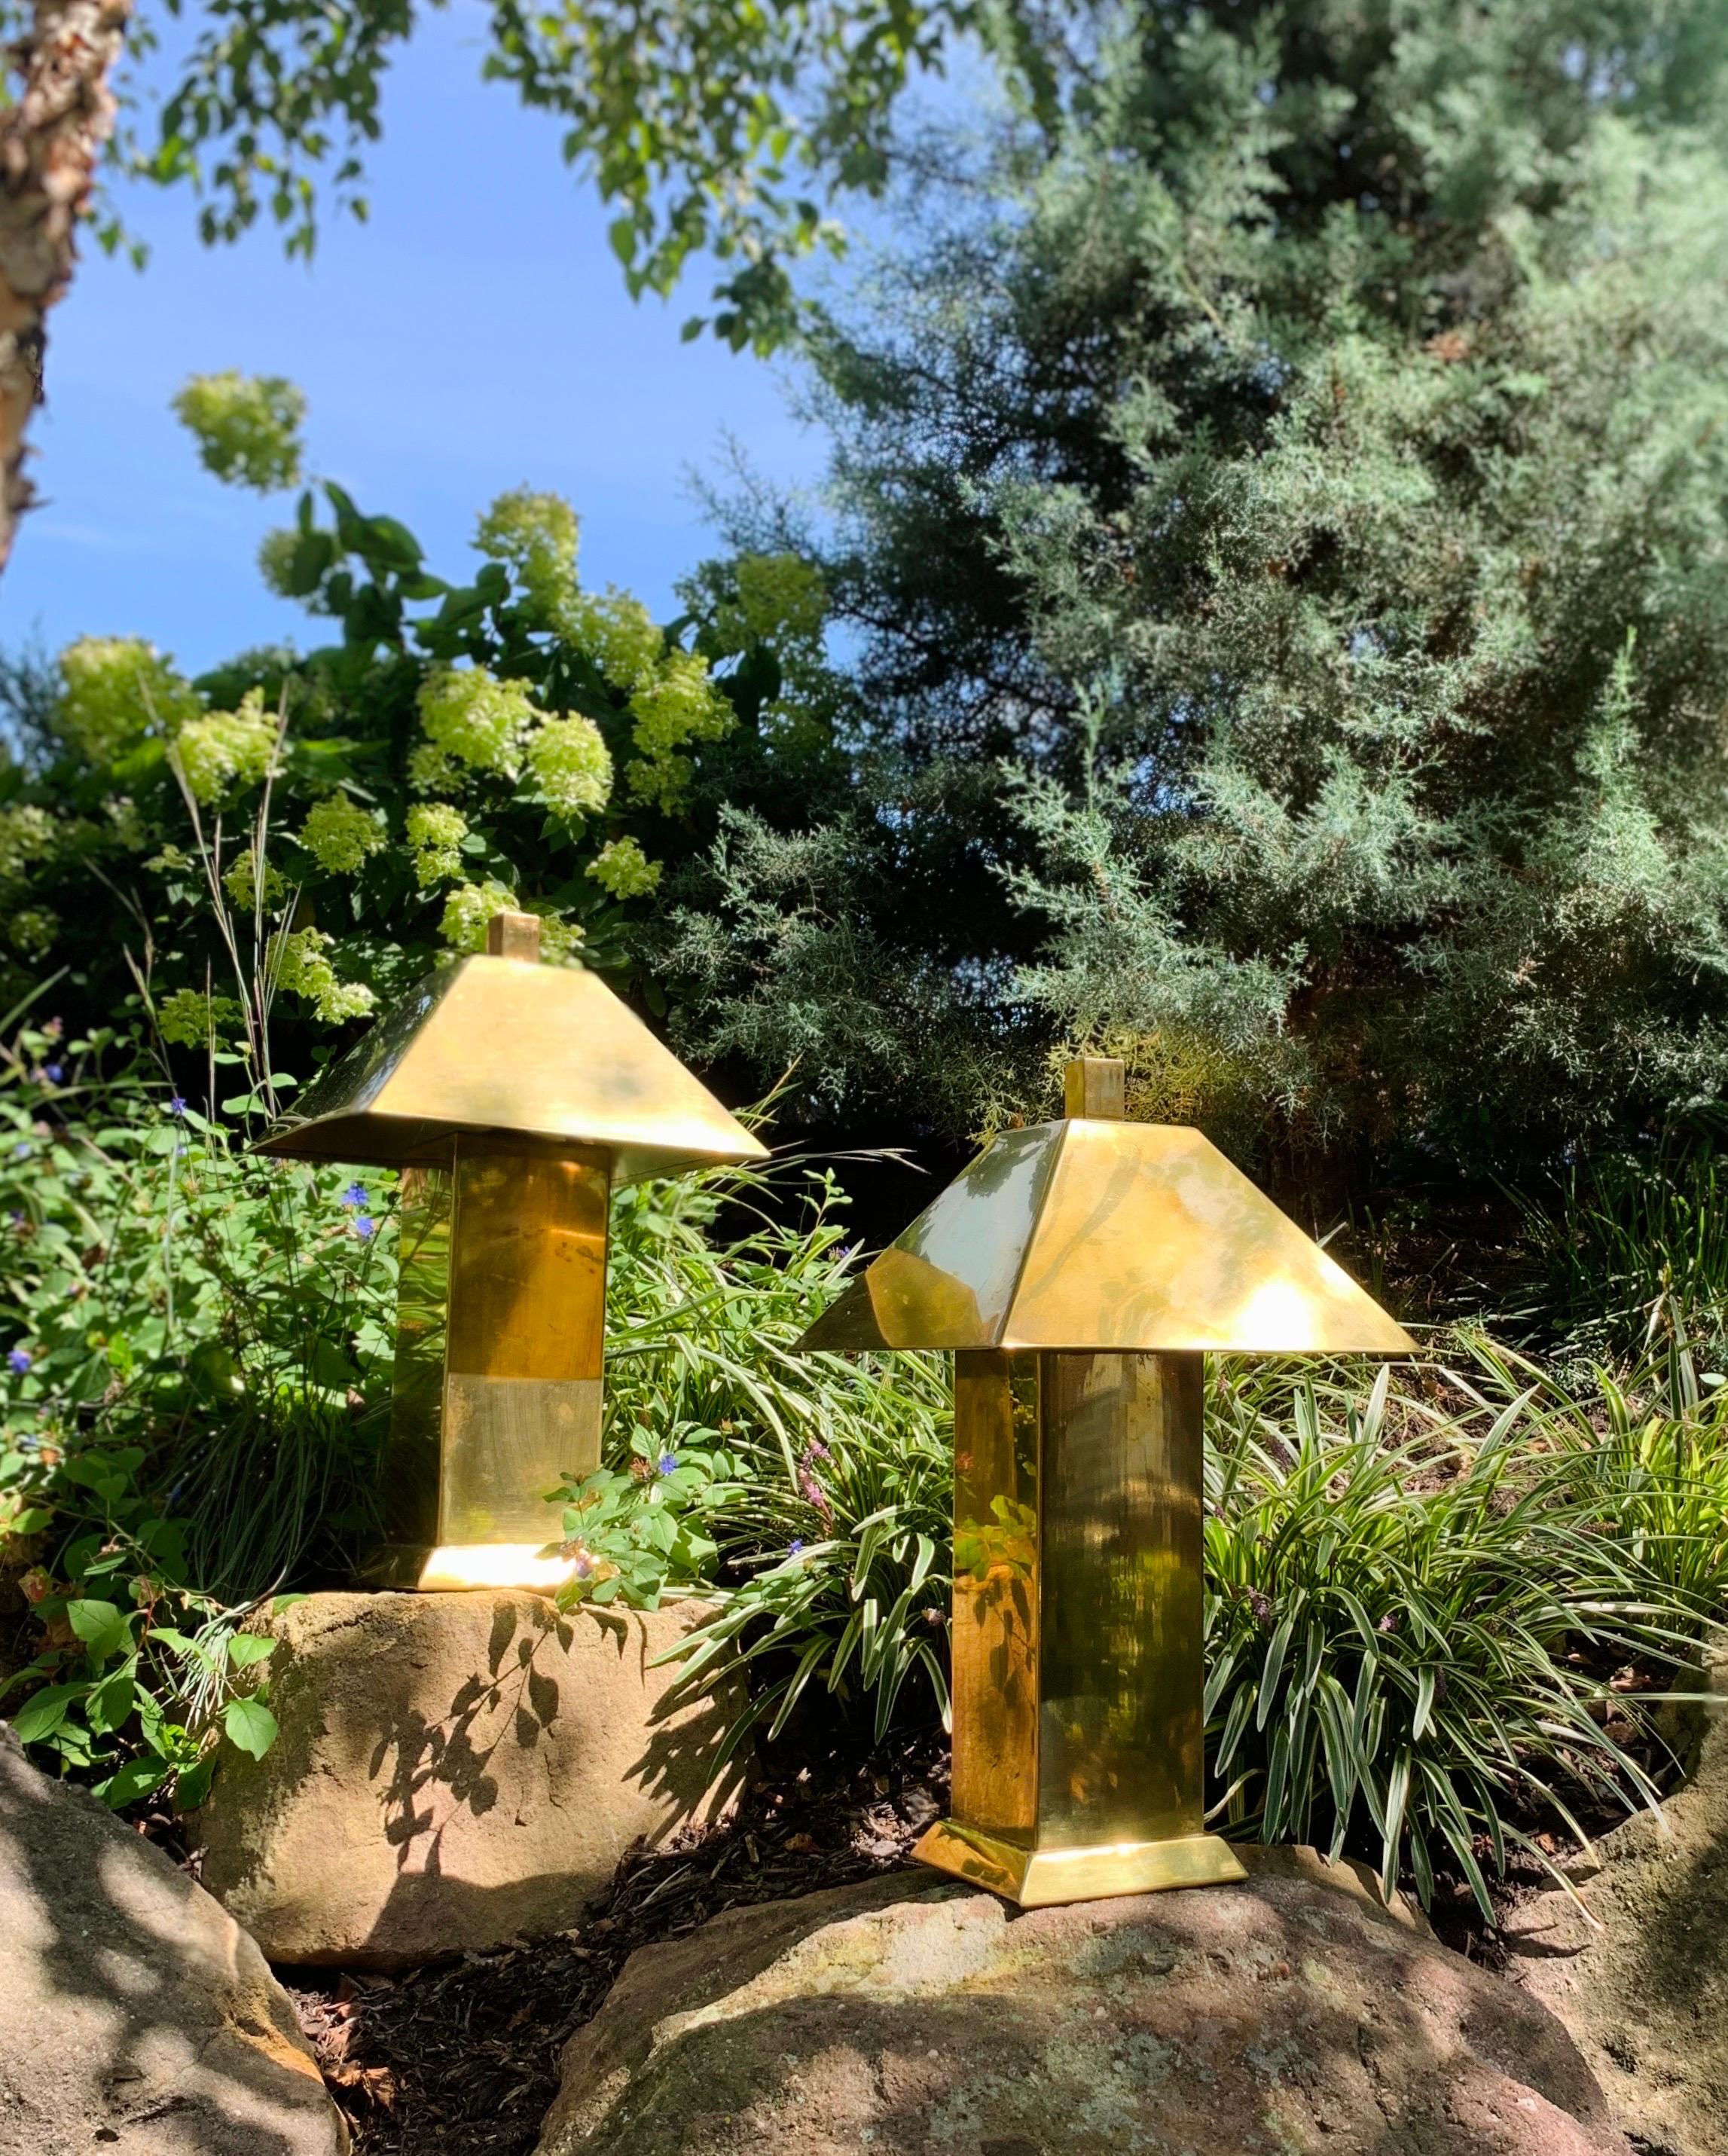 This is a pair of 1970s brass table lamps, cubist in form, attributed to Koch & Lowy. The listed price includes the pair. They feature brass-electroplated bases and shades. They have a warm brass patina and are in 100% original condition.

Each lamp